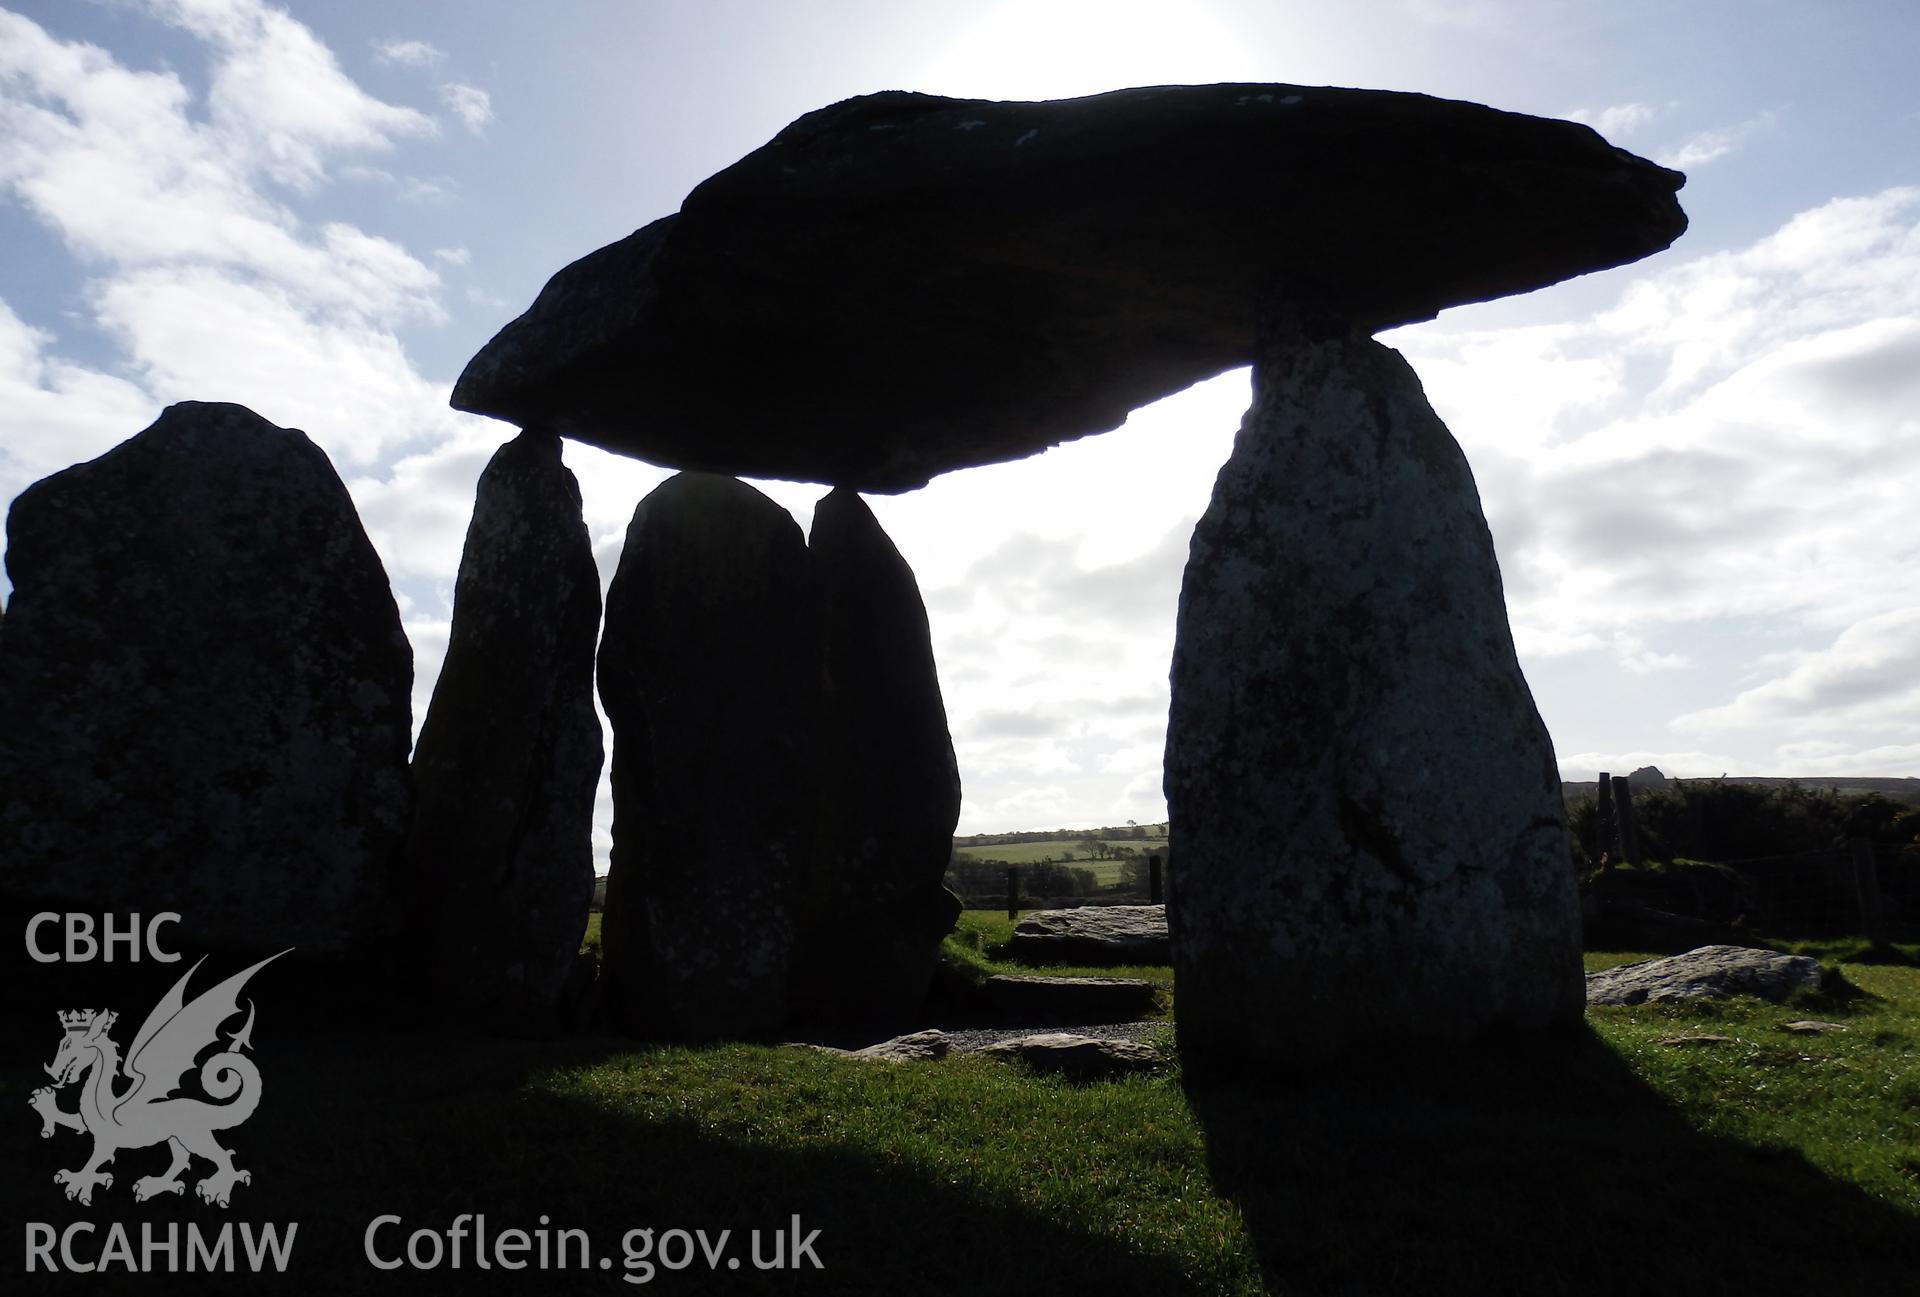 Colour photo showing Pentre Ifan, produced by Paul R. Davis, 10th March 2017.